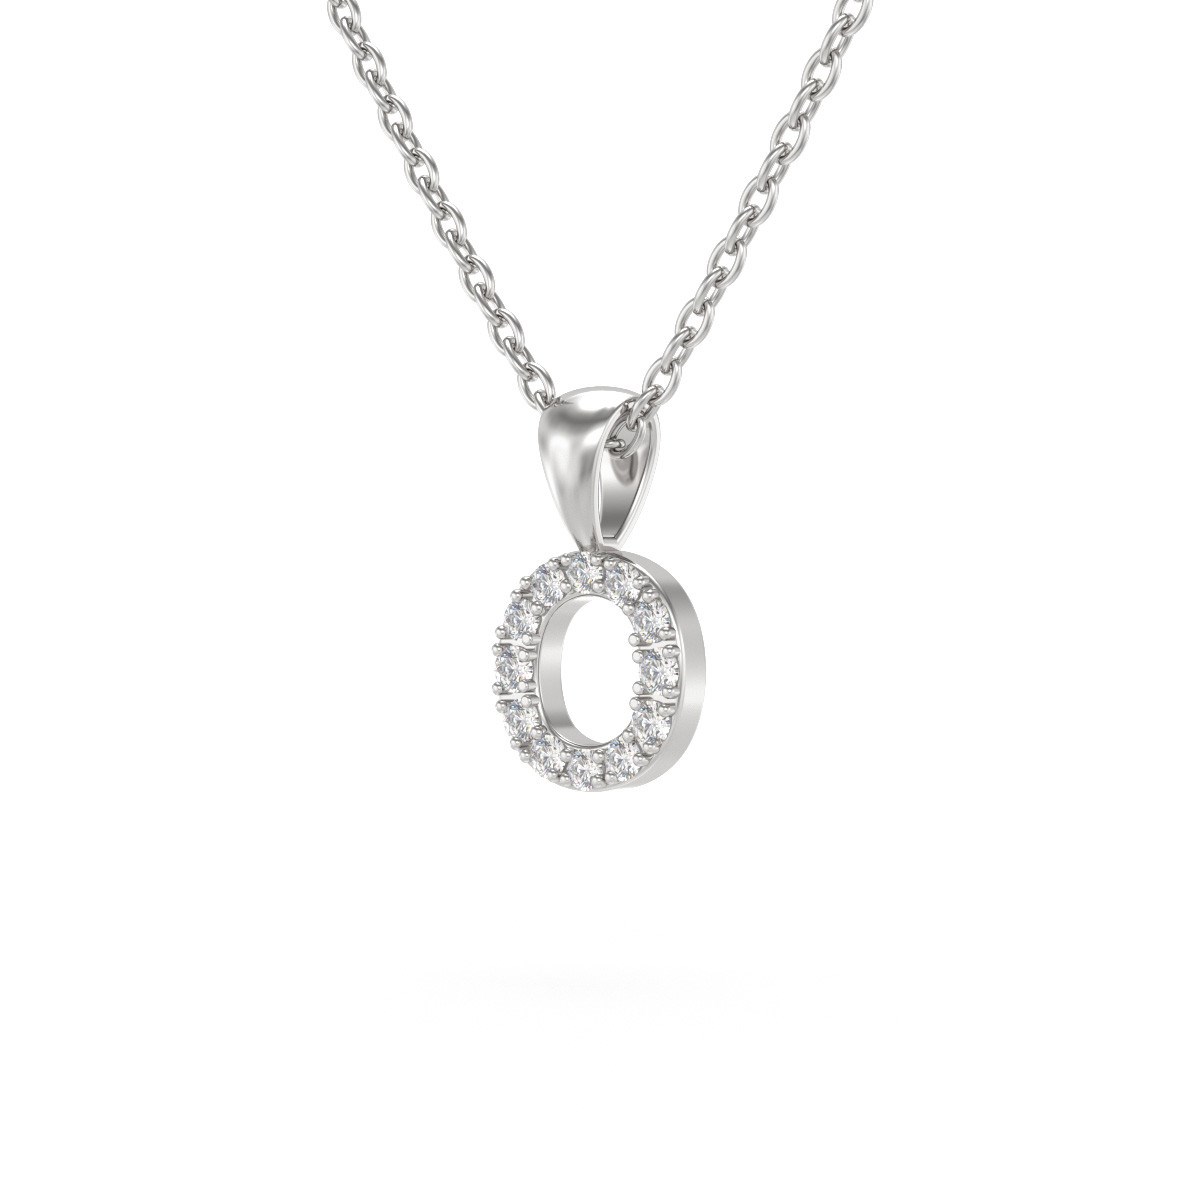 Collier Pendentif ADEN Lettre O Or 750 Blanc Diamant Chaine Or 750 incluse 0.72grs - vue 3